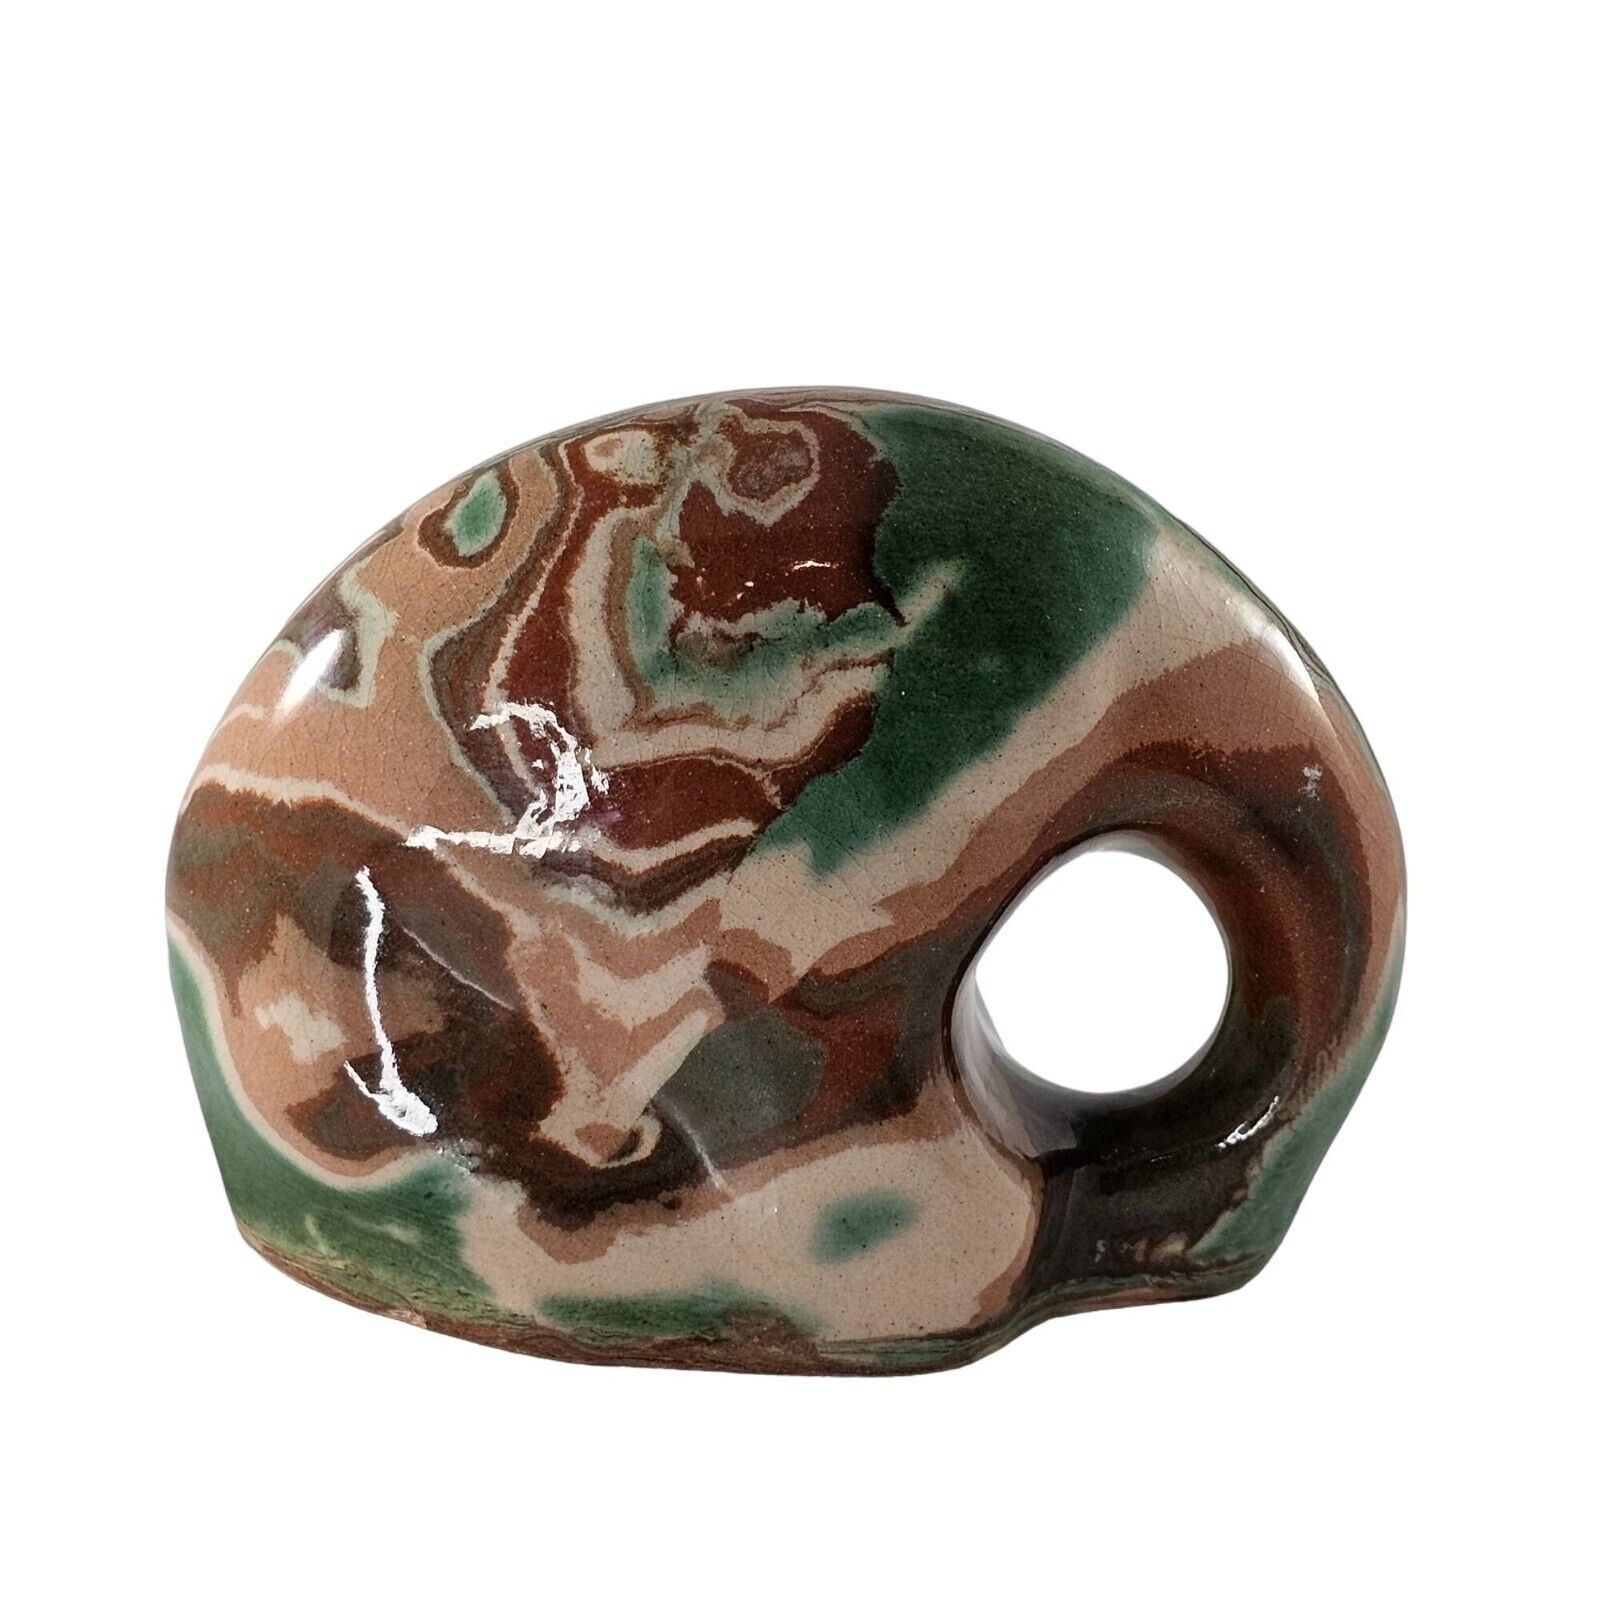 Primary image for Art Pottery Elephant Figurine Camouflage Color Brown Green Handmade